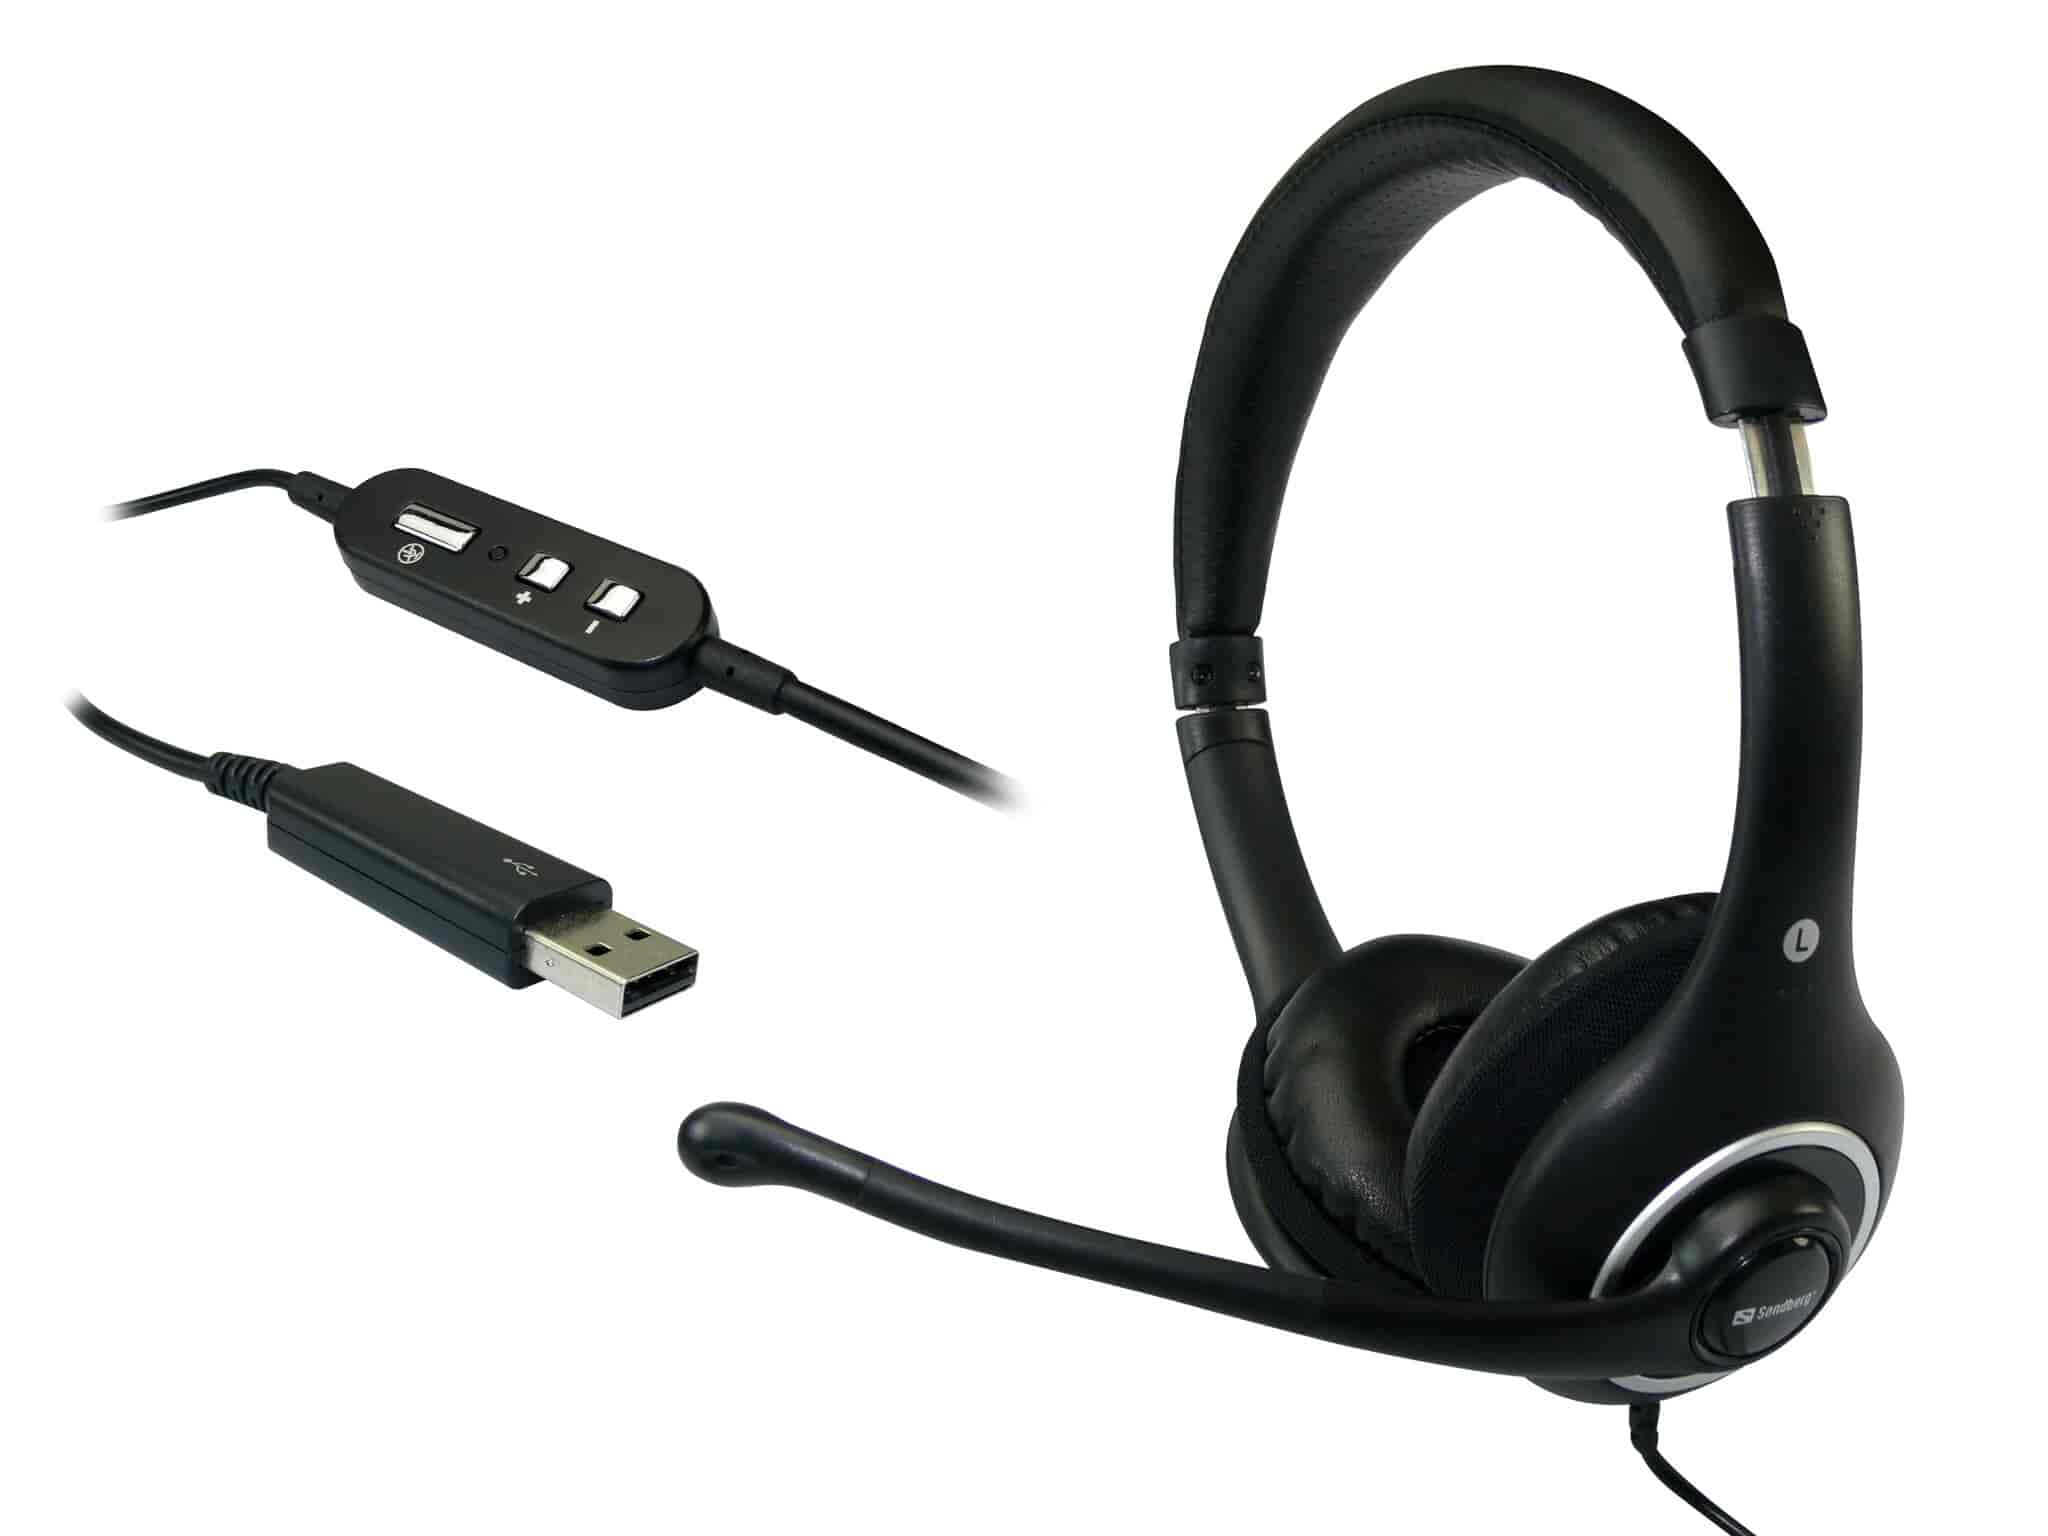 Headset with USB connector